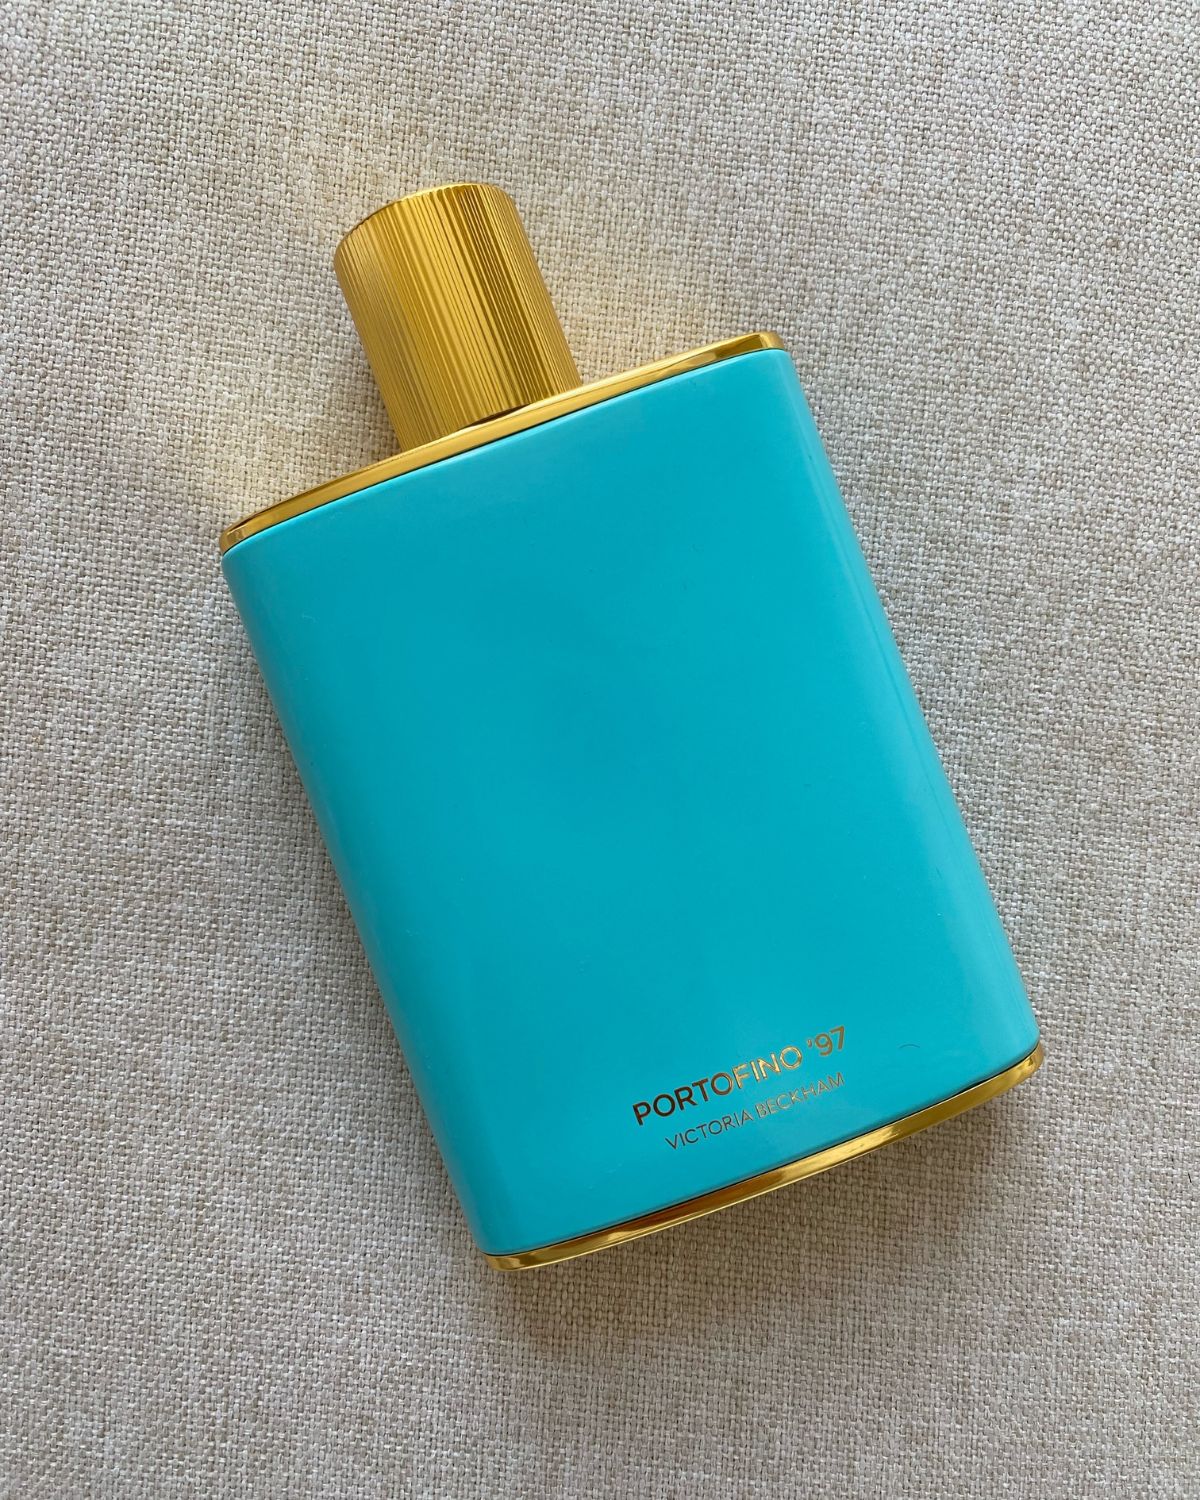 An Honest Review of Victoria Beckham's Debut Perfume | Who What Wear